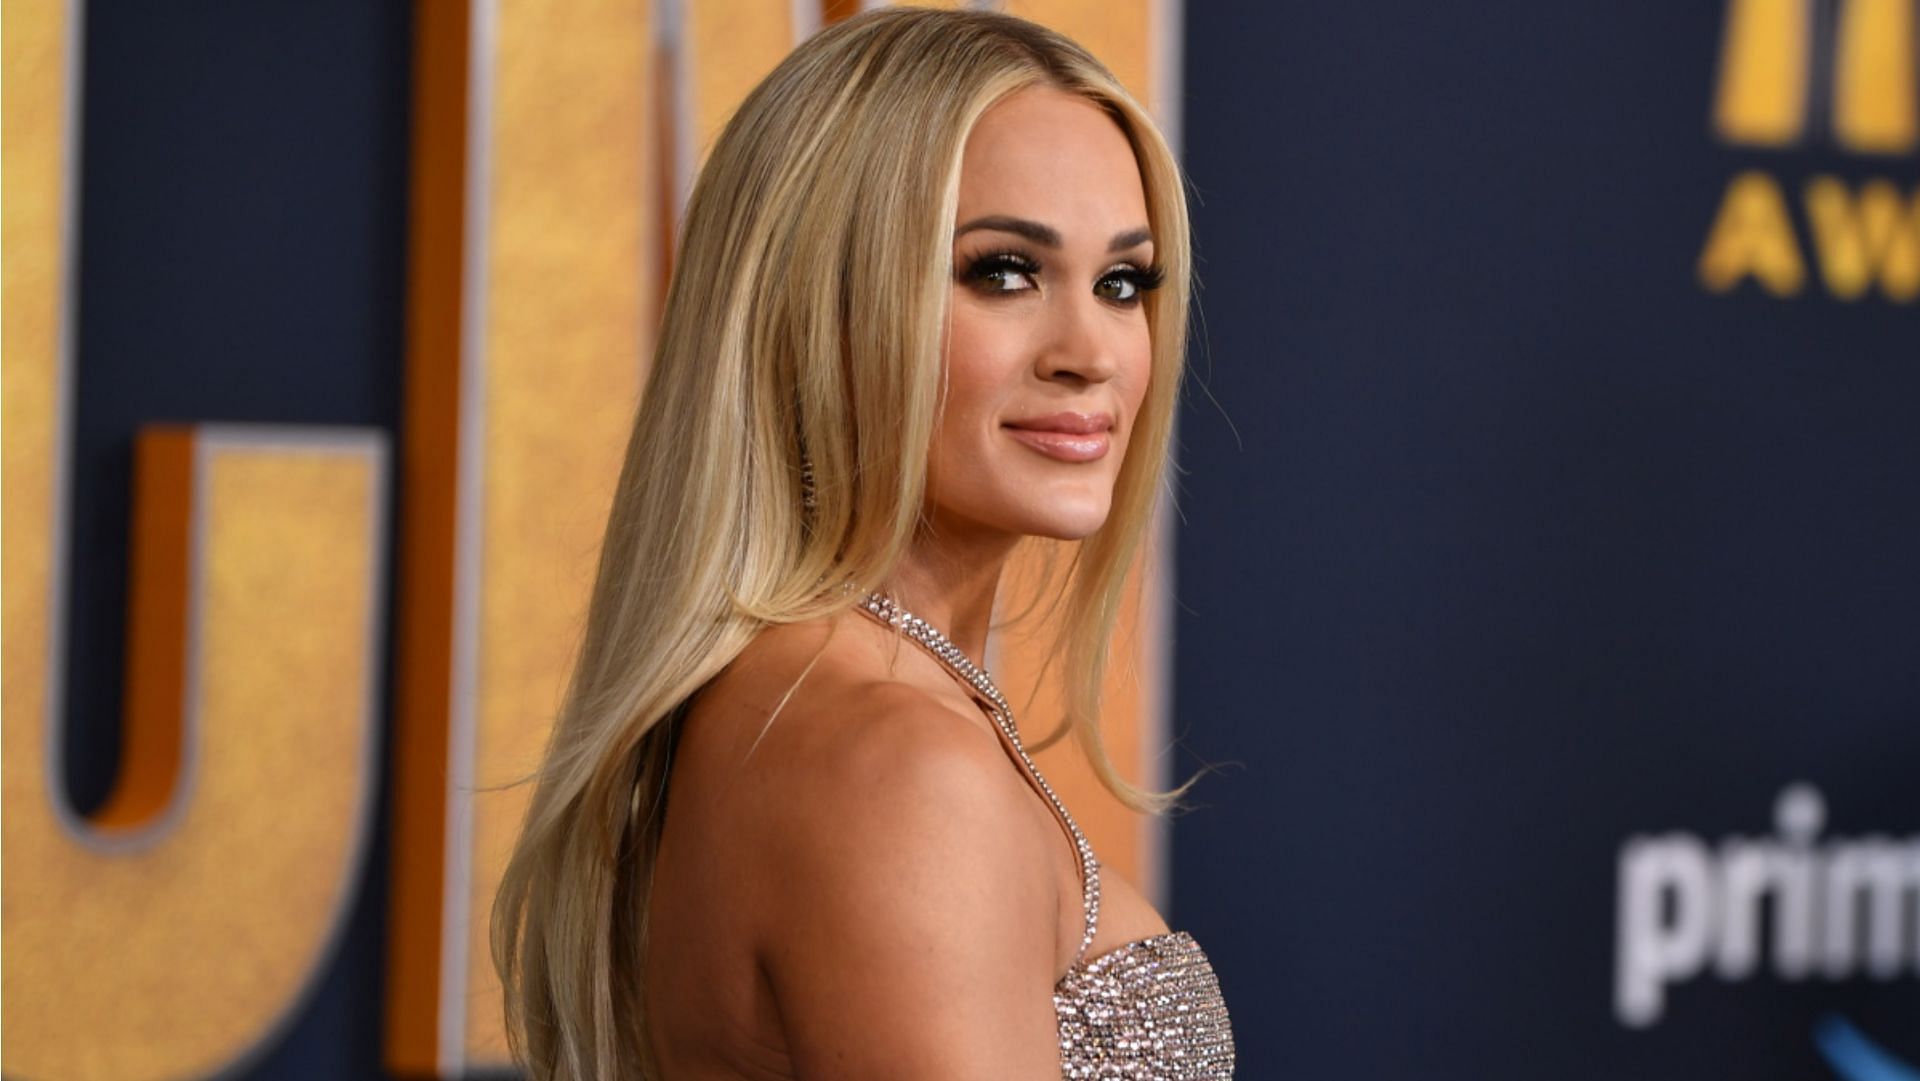 Carrie Underwood and Mike Fisher share two kids together. (Image via Denise Truscello/Getty)